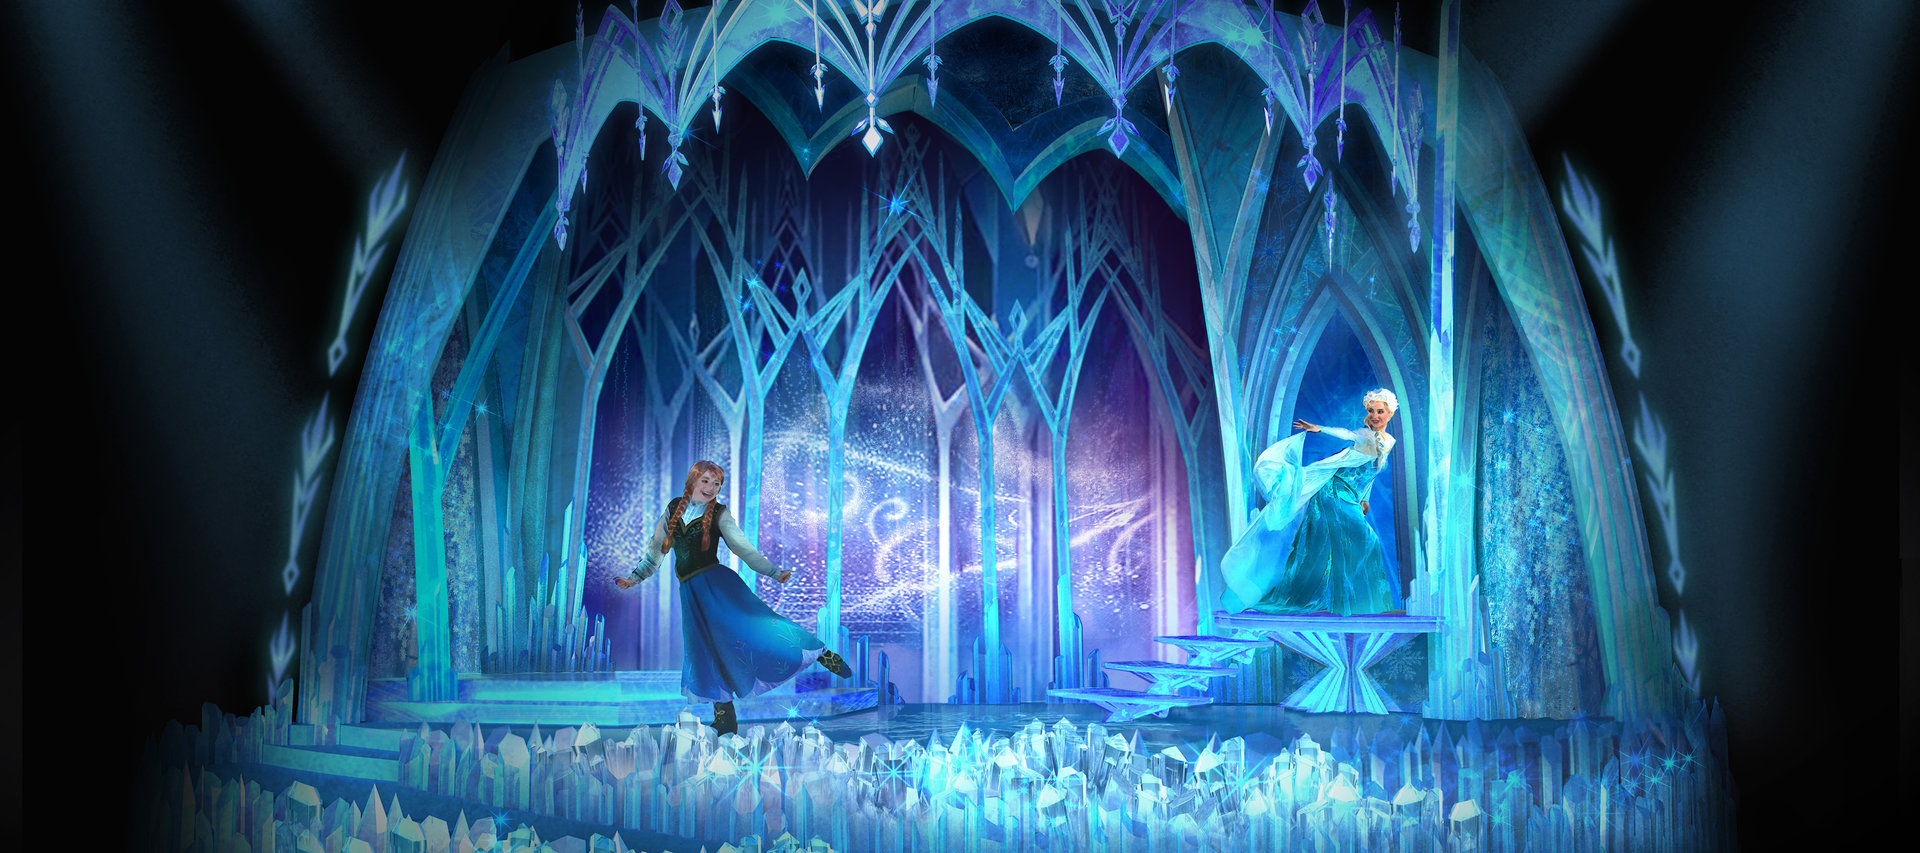 A Frozen Celebration at Disneyland Paris: What you need to know